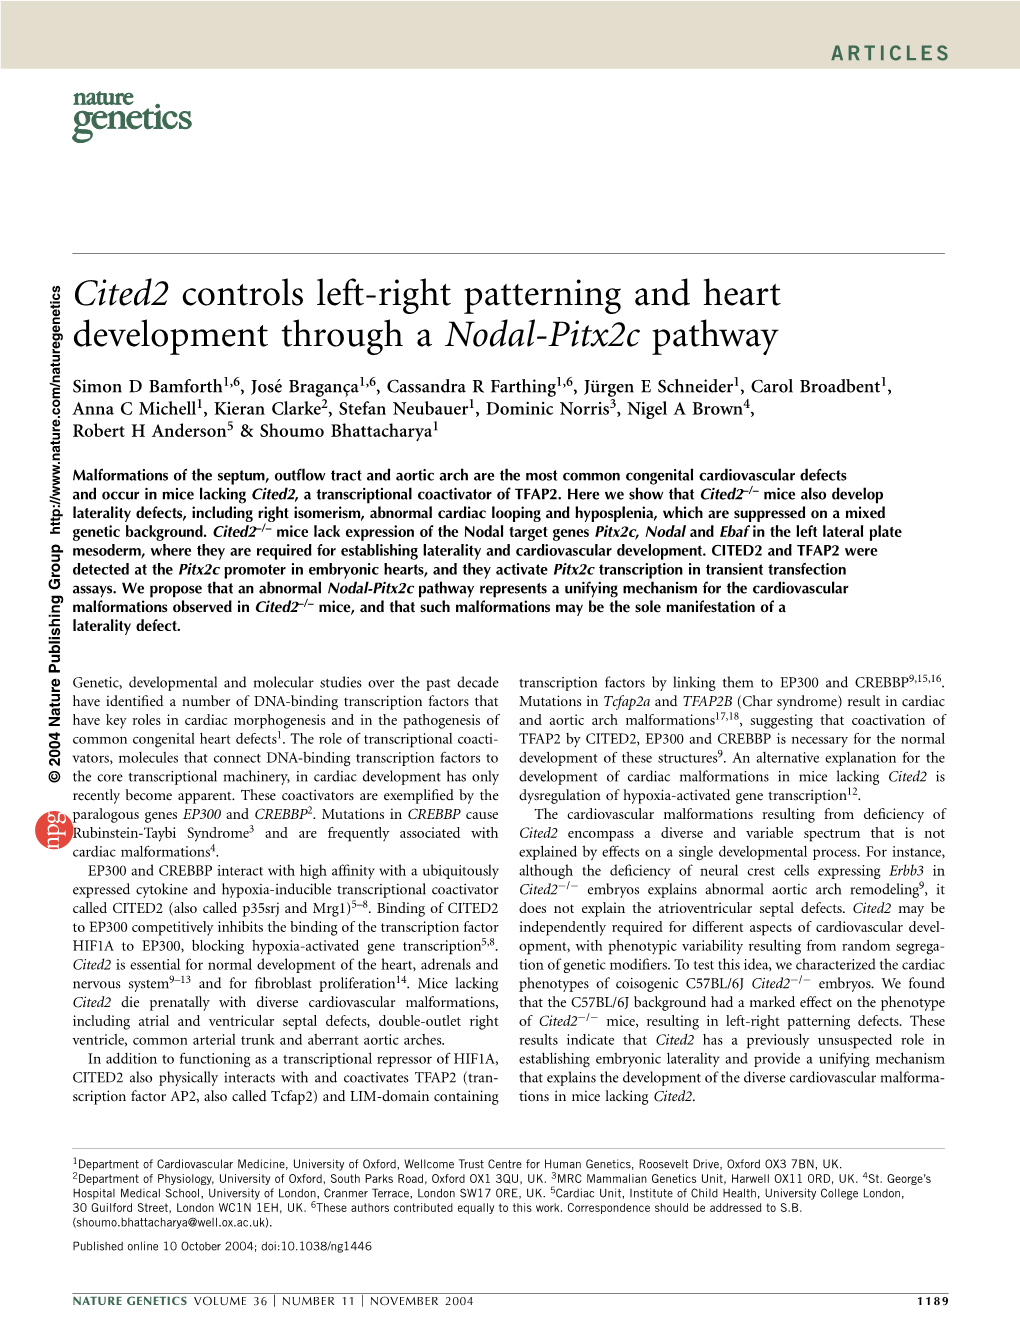 Cited2 Controls Left-Right Patterning and Heart Development Through a Nodal-Pitx2c Pathway